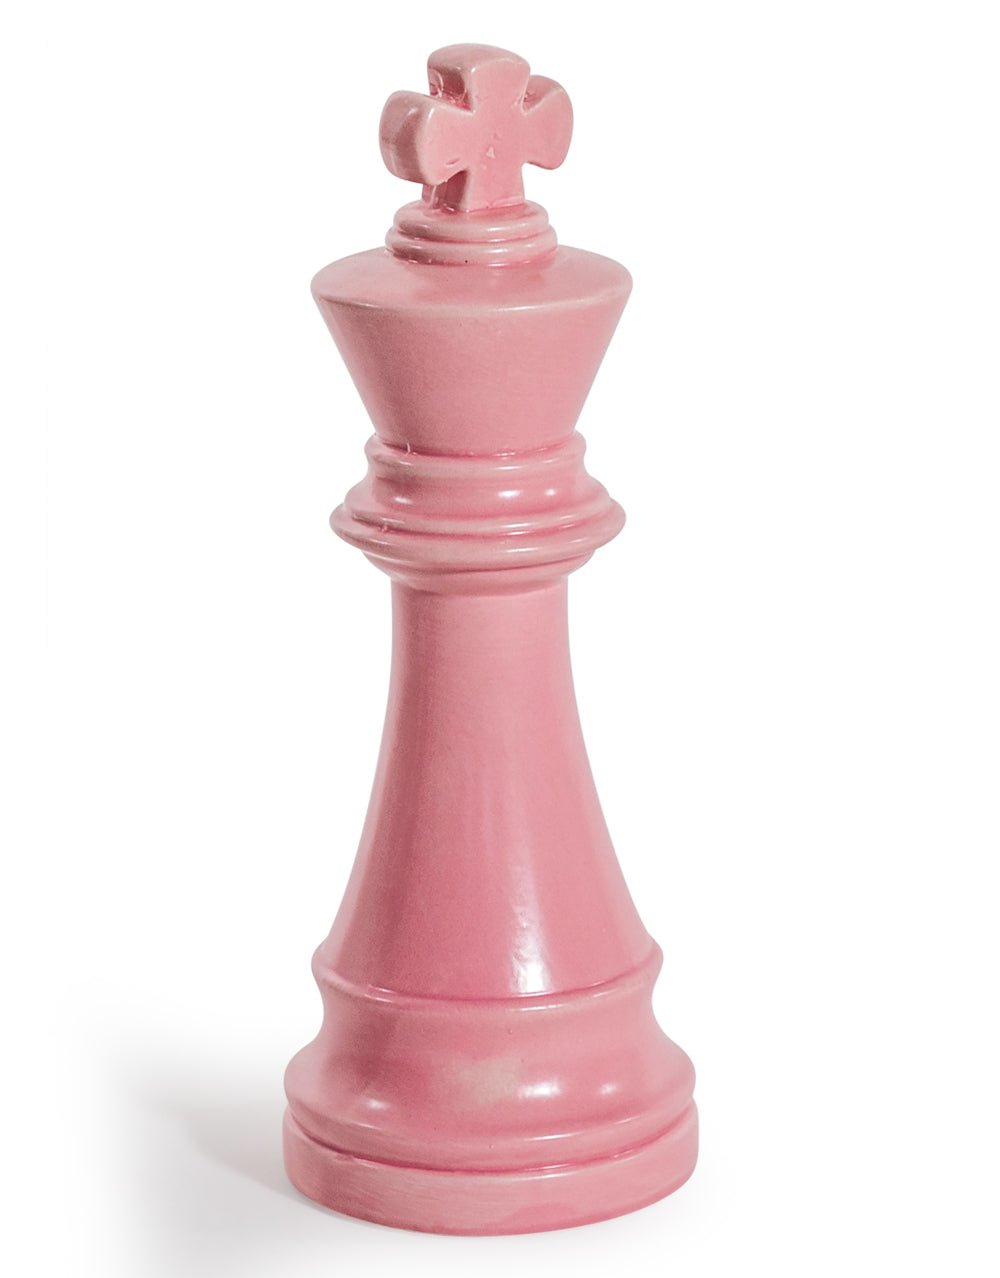 King Chess Piece Ornament